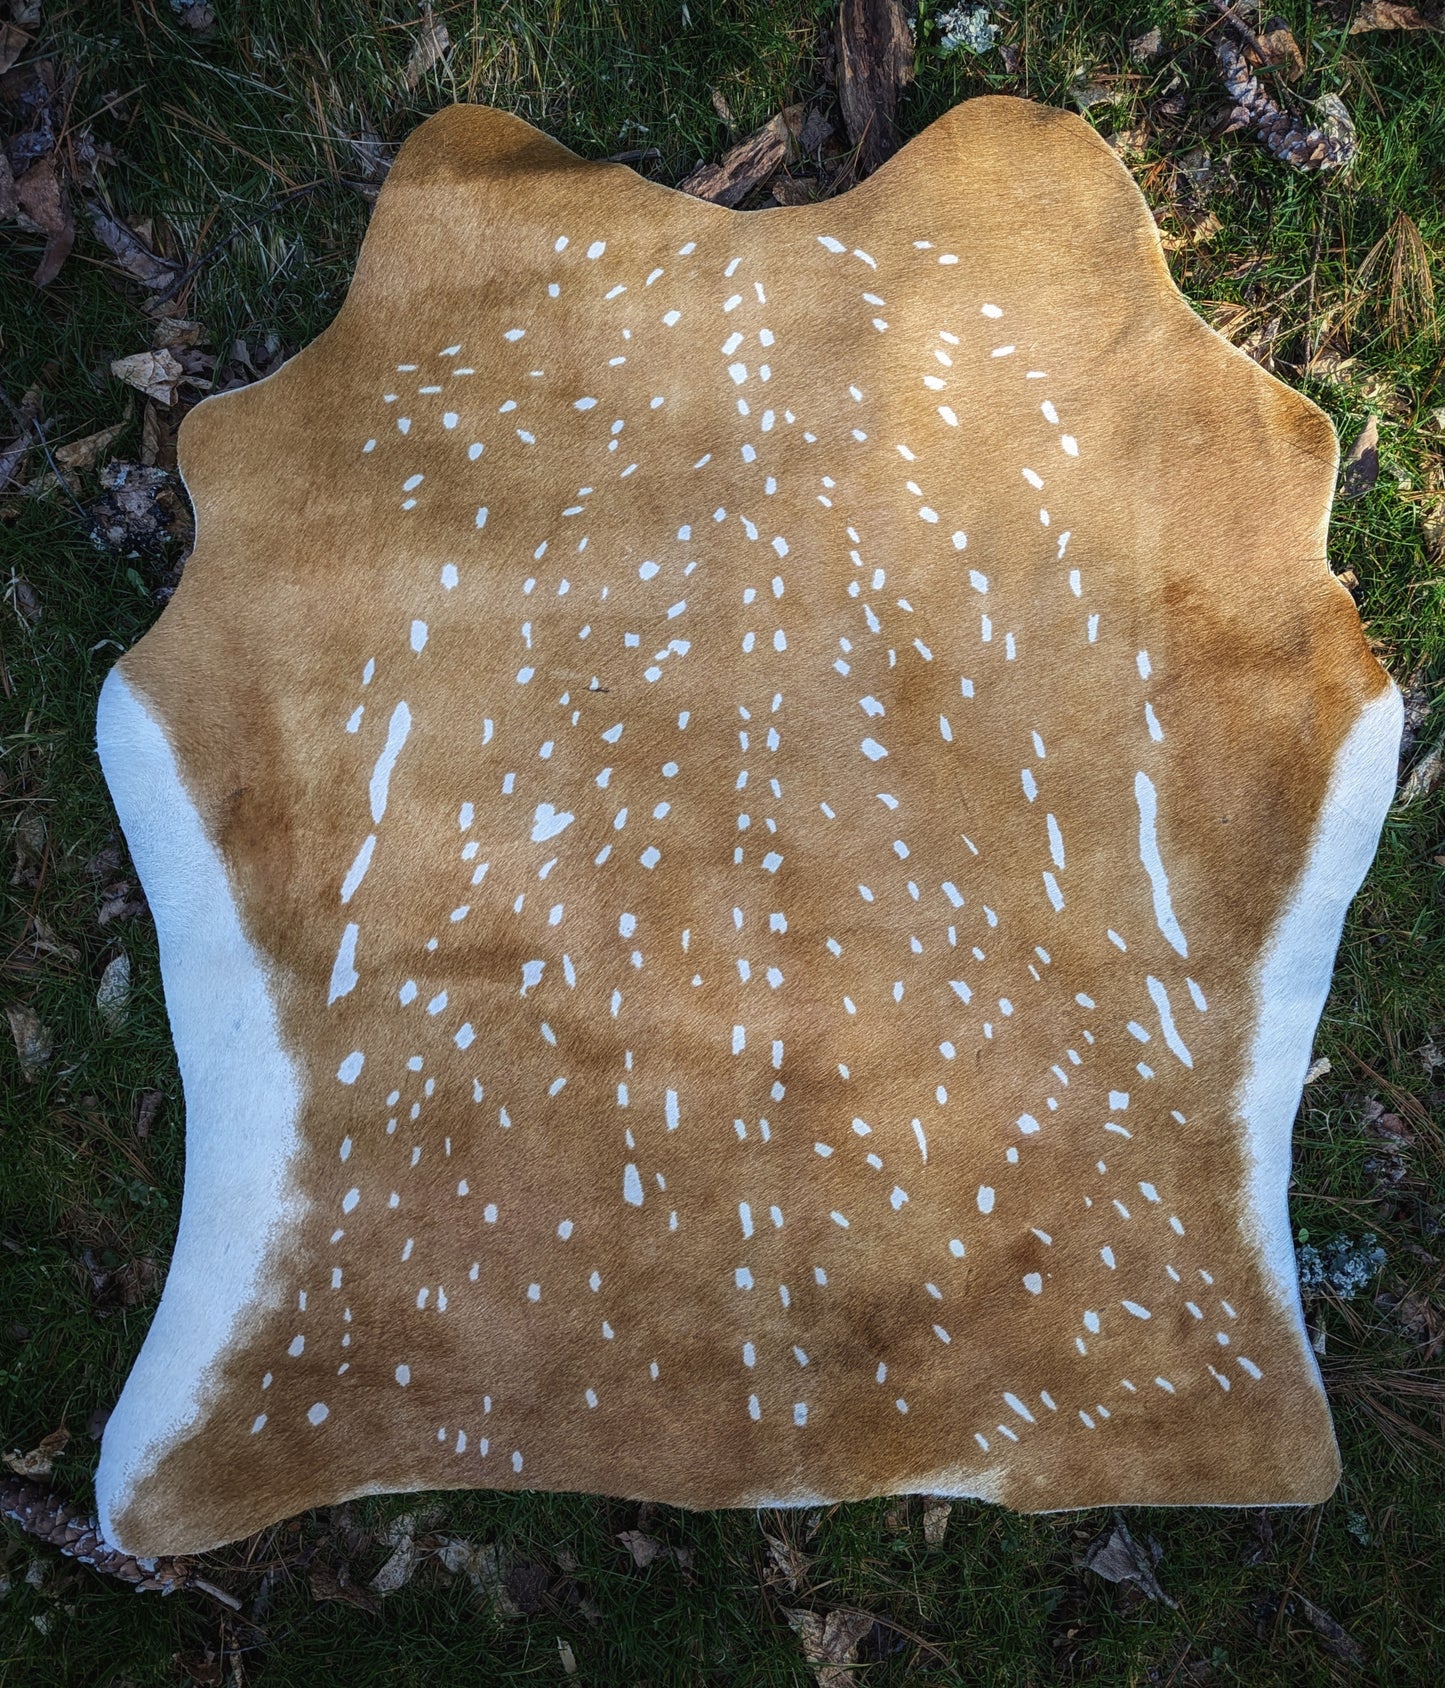 "Fauxn" Fawn Dyed Cowhide Cow Skin